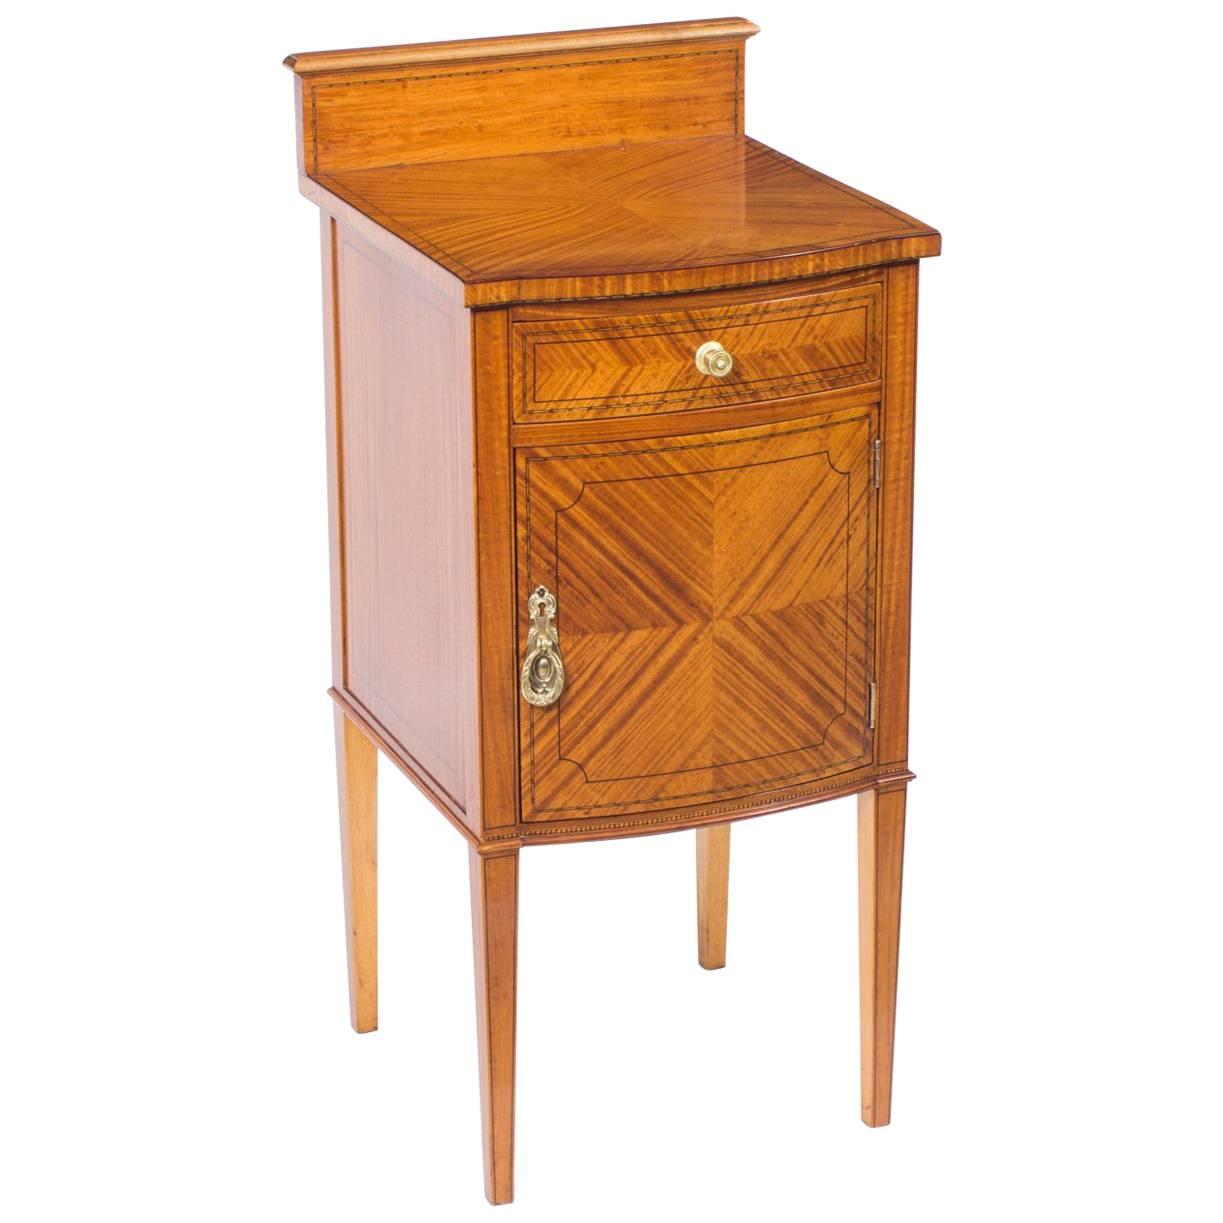 Antique Victorian Satinwood Bowfront Bedside Cabinet, 19th Century For Sale